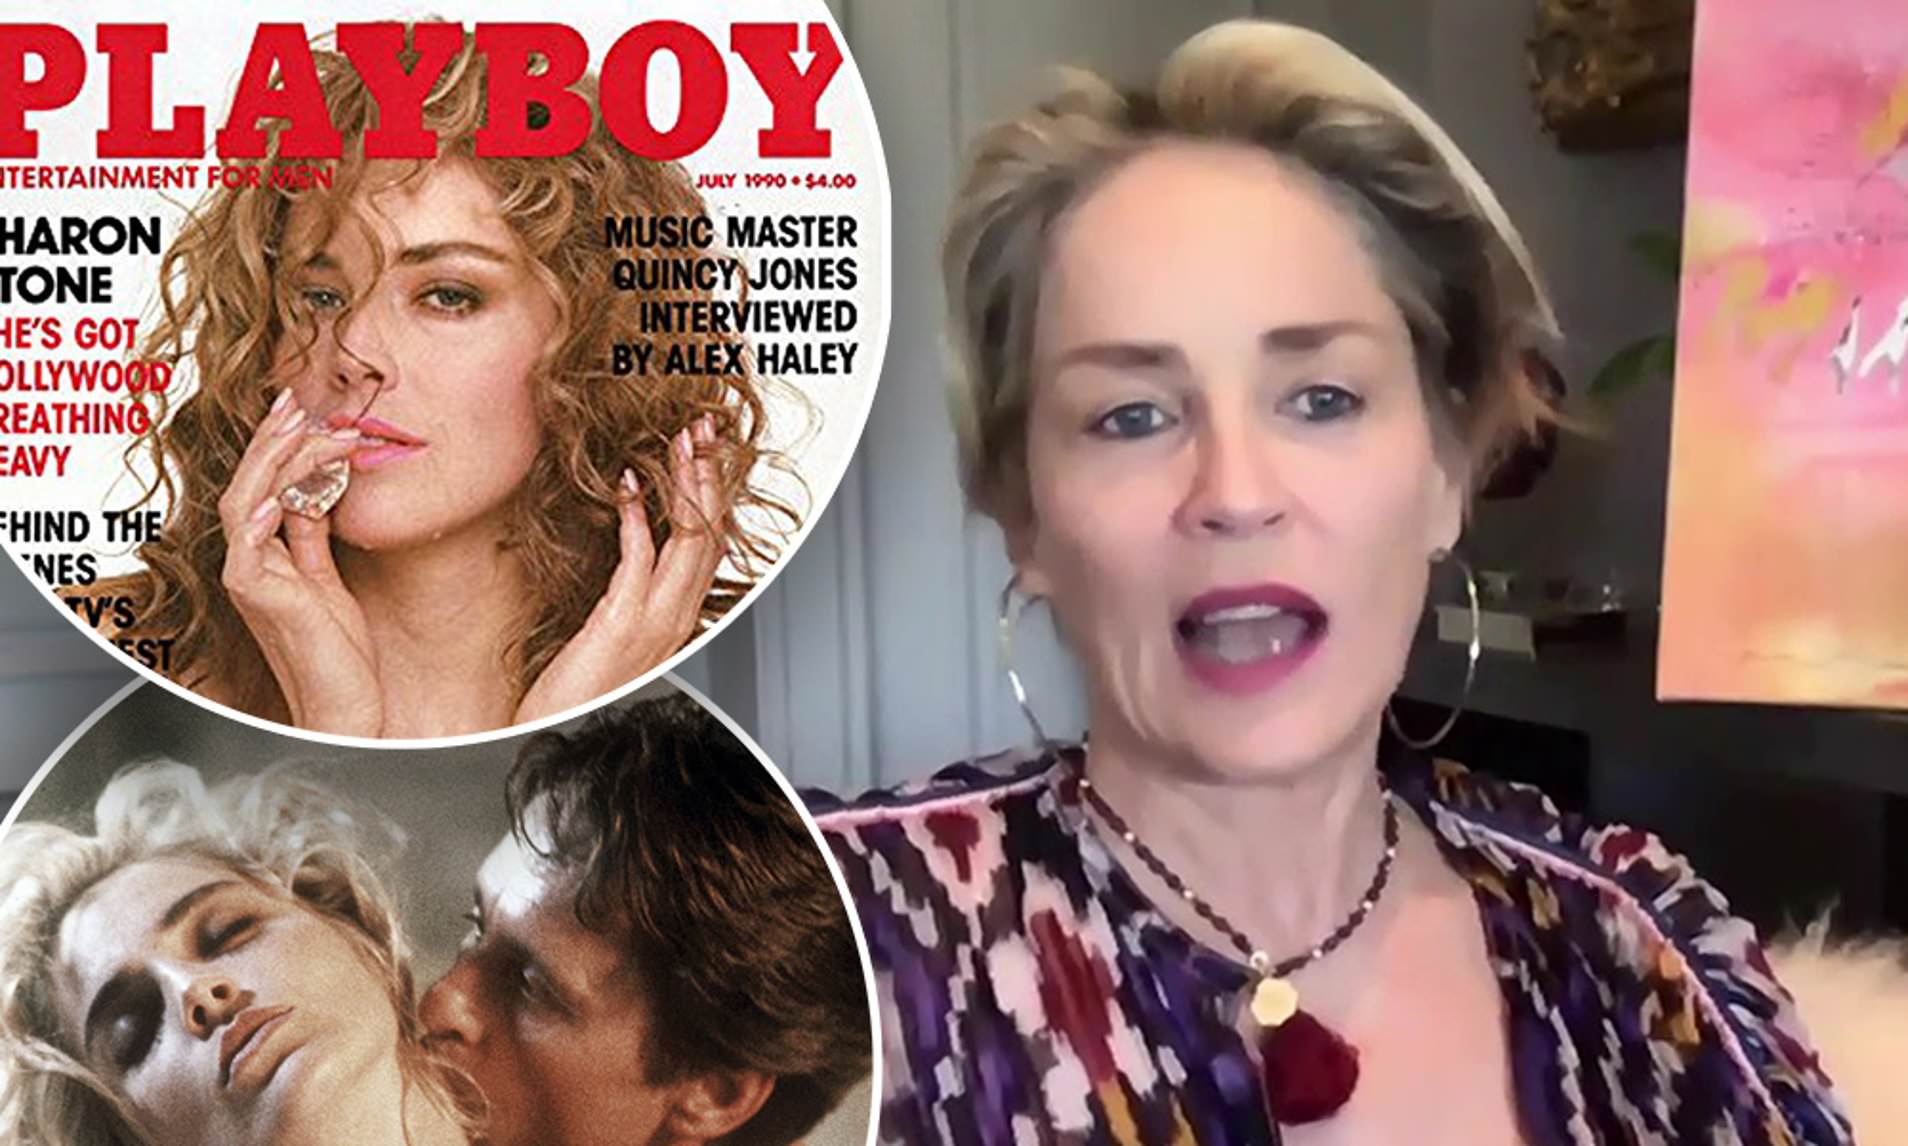 daron rose recommends Has Sharon Stone Ever Been Nude